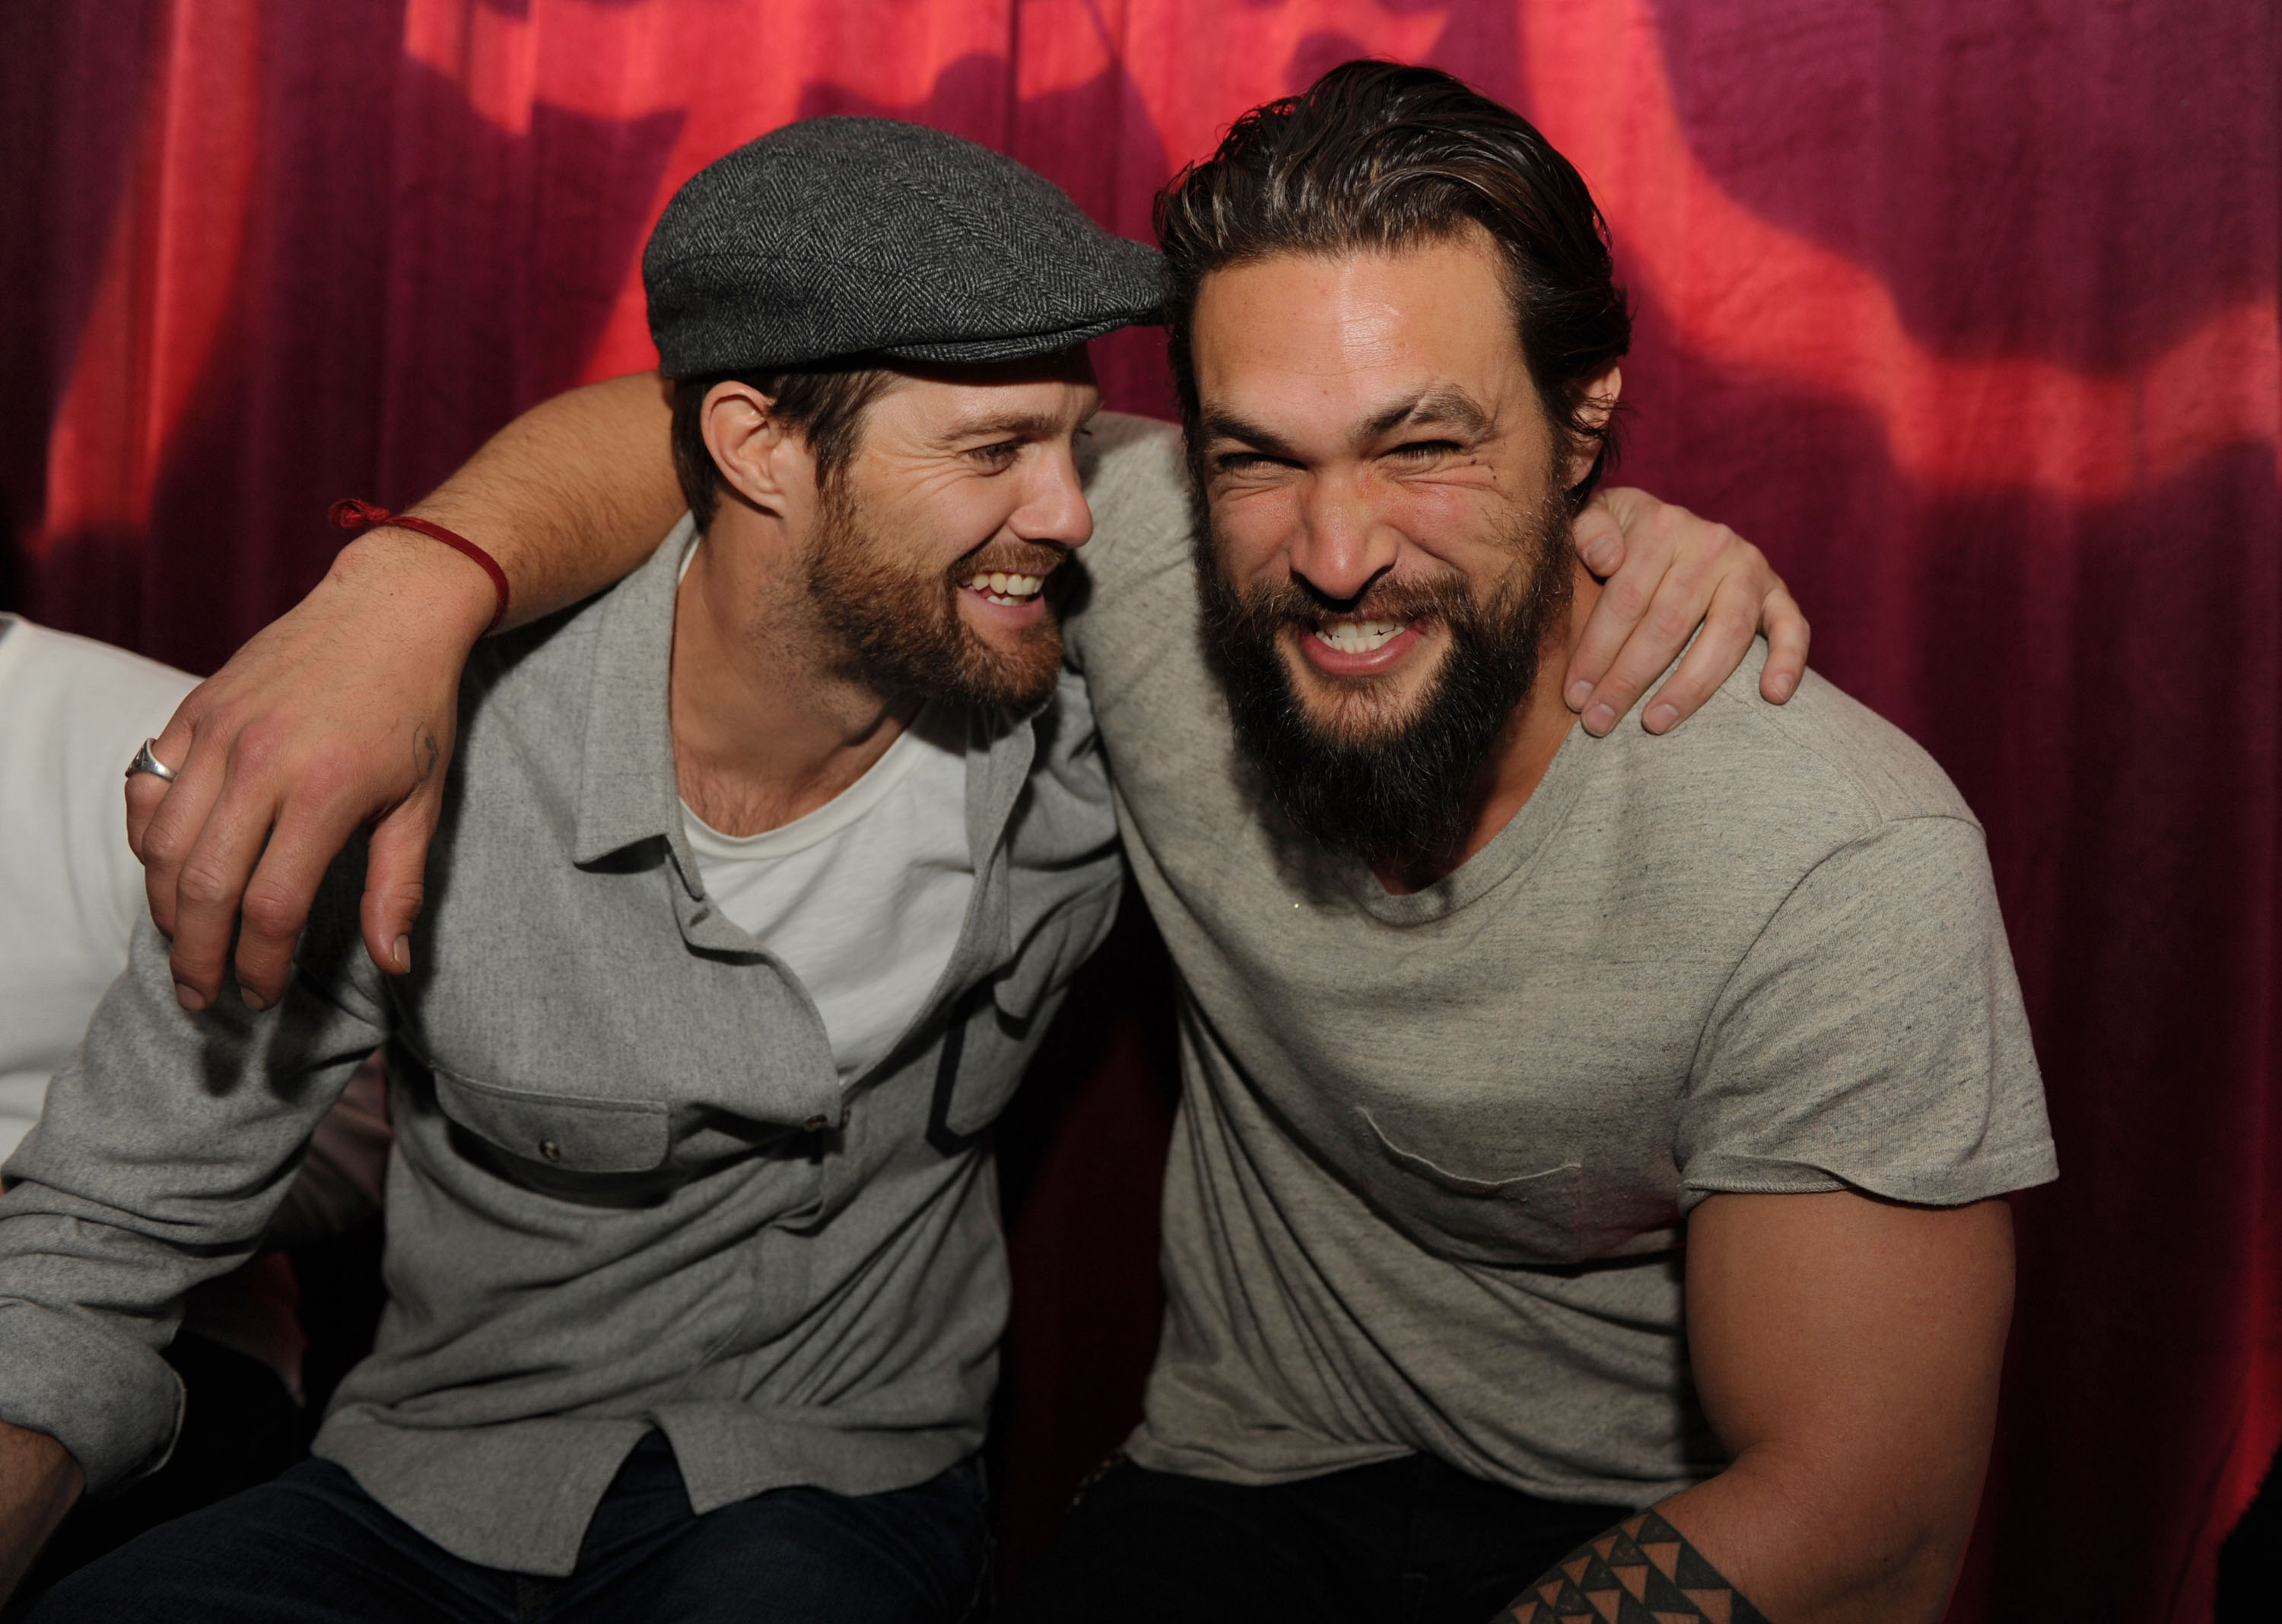 Geoff Stults & Jason Momoa - "Le Bare" After Party at Tao at Village at The Lift with Moët & Chandon Nectar Impérial Rosé & Stella Artois